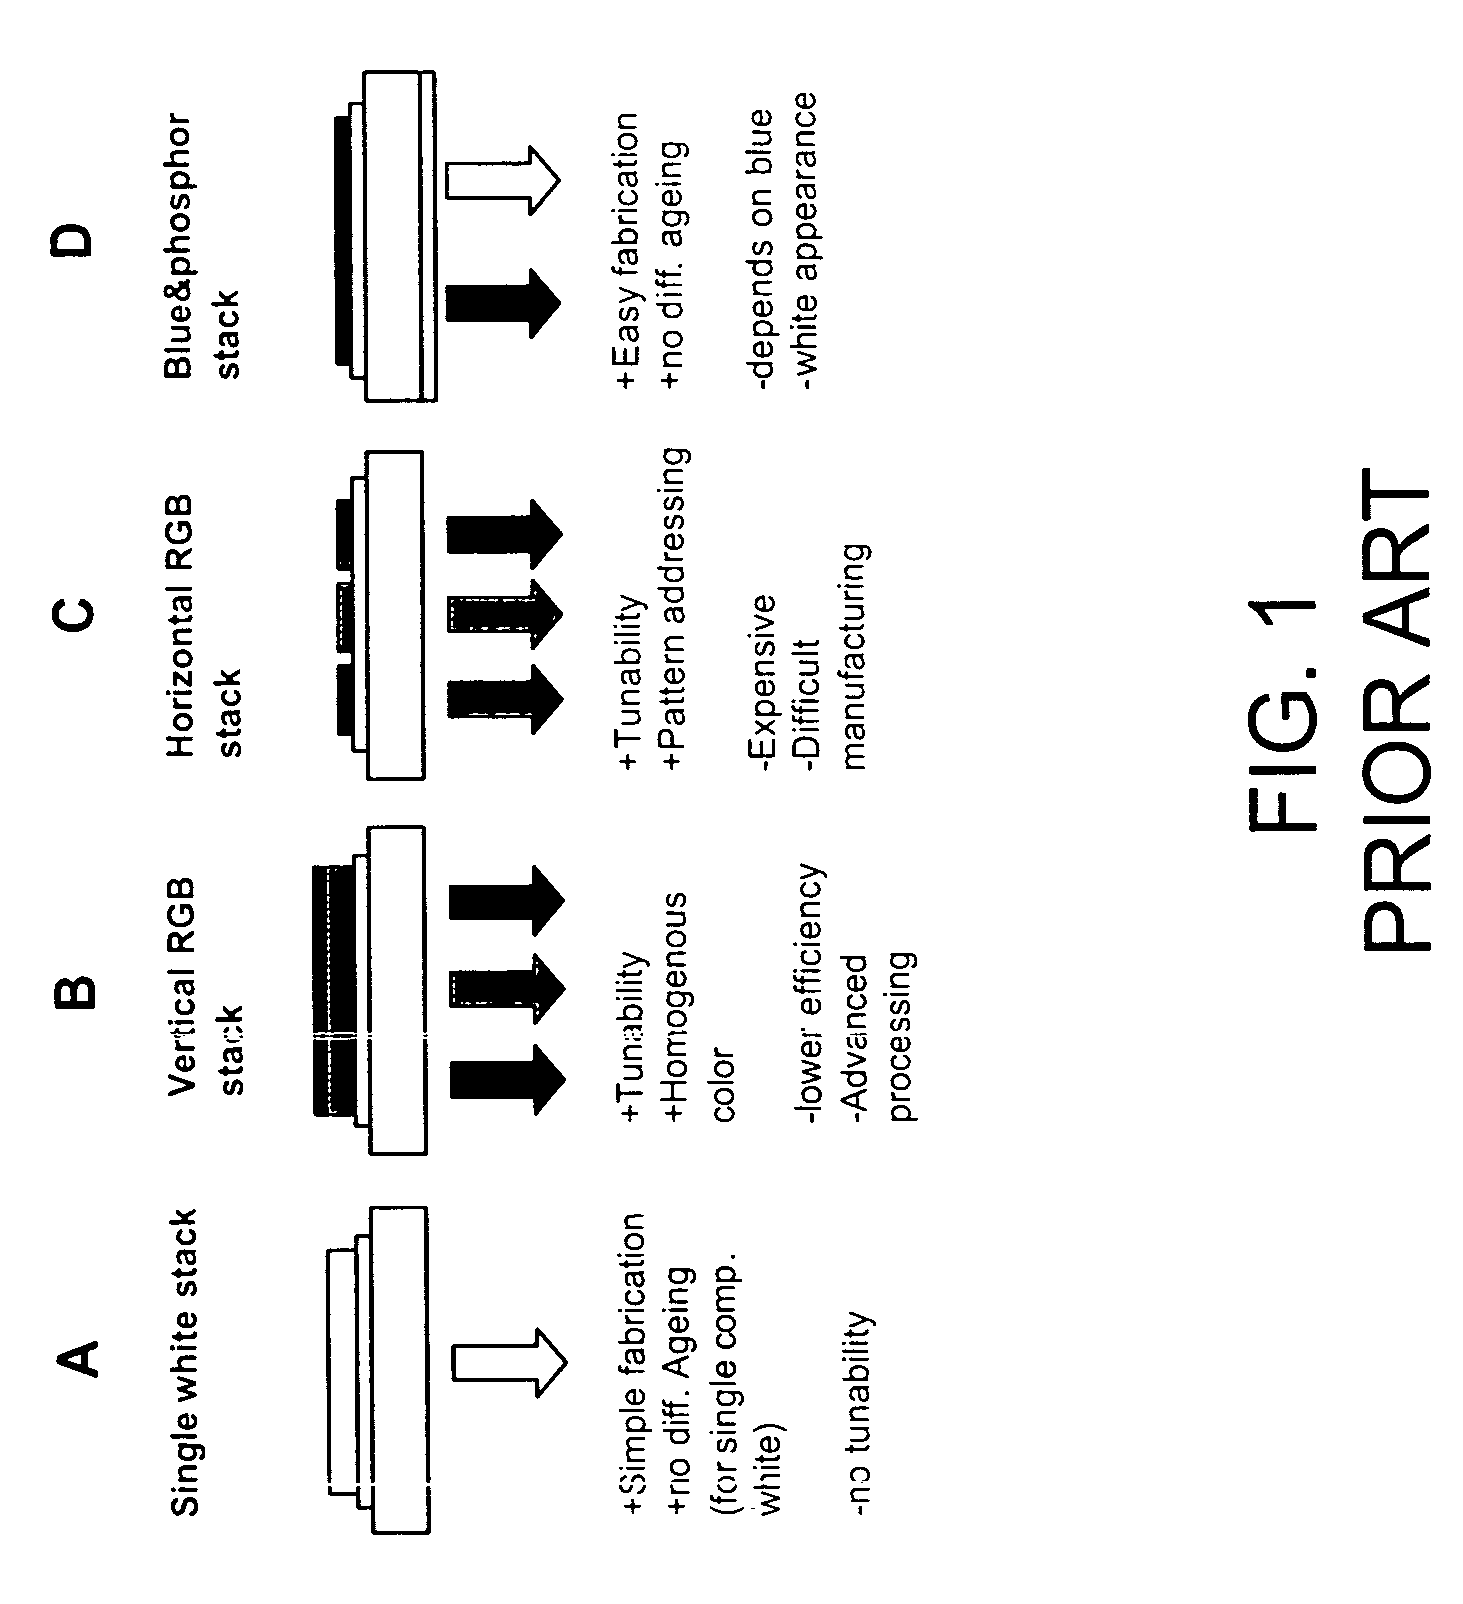 Method to generate high efficient devices which emit high quality light for illumination